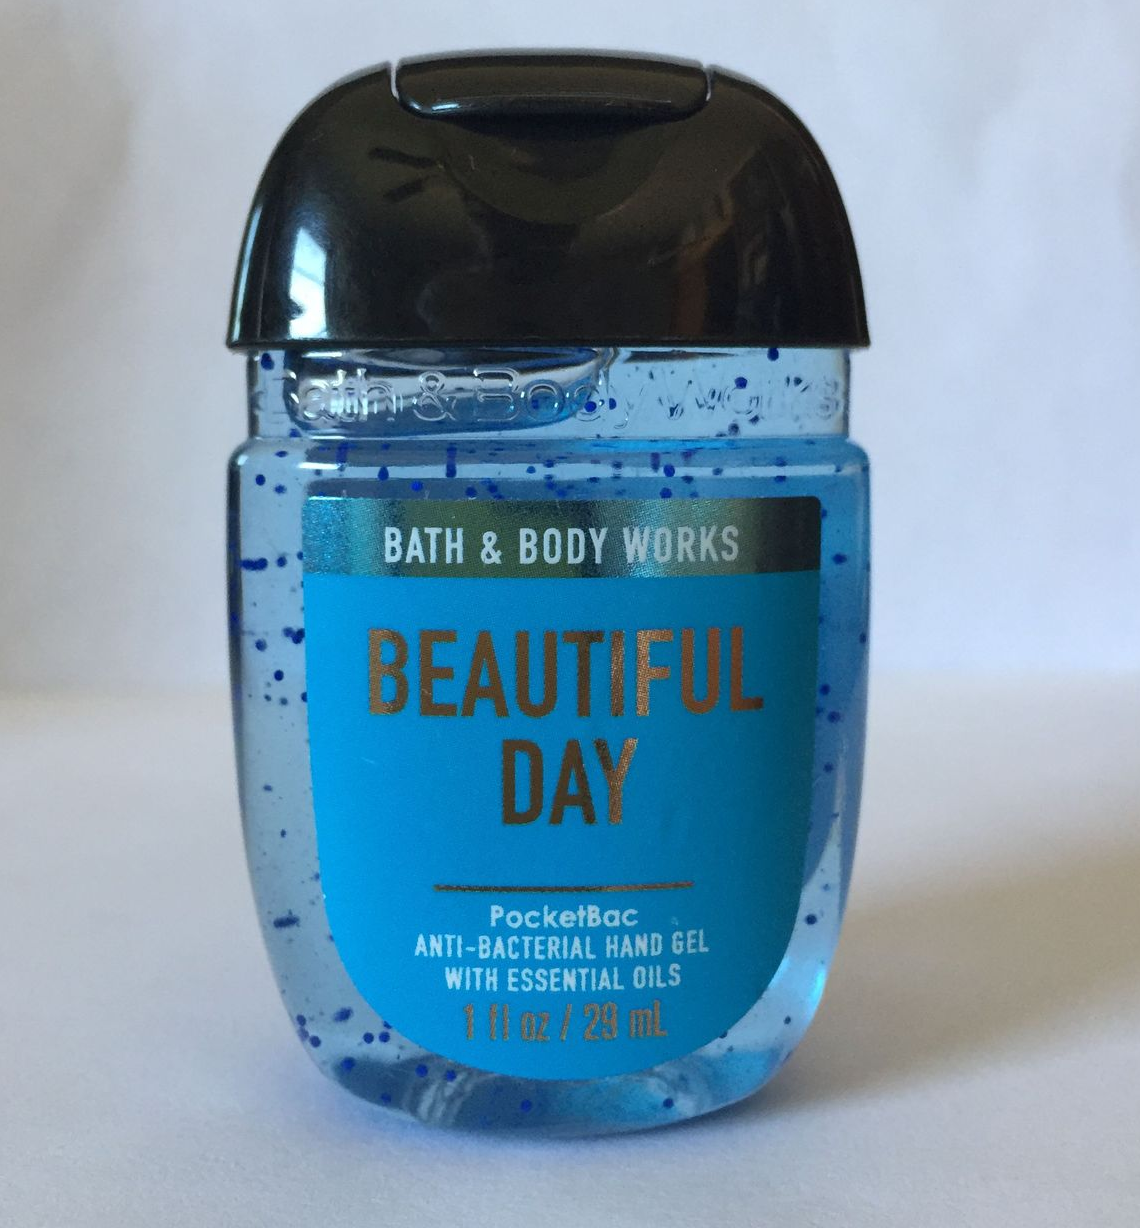 Bath and Body Works BEAUTIFUL DAY POCKETBAC Anti-Bacterial Hand Gel *NEW*